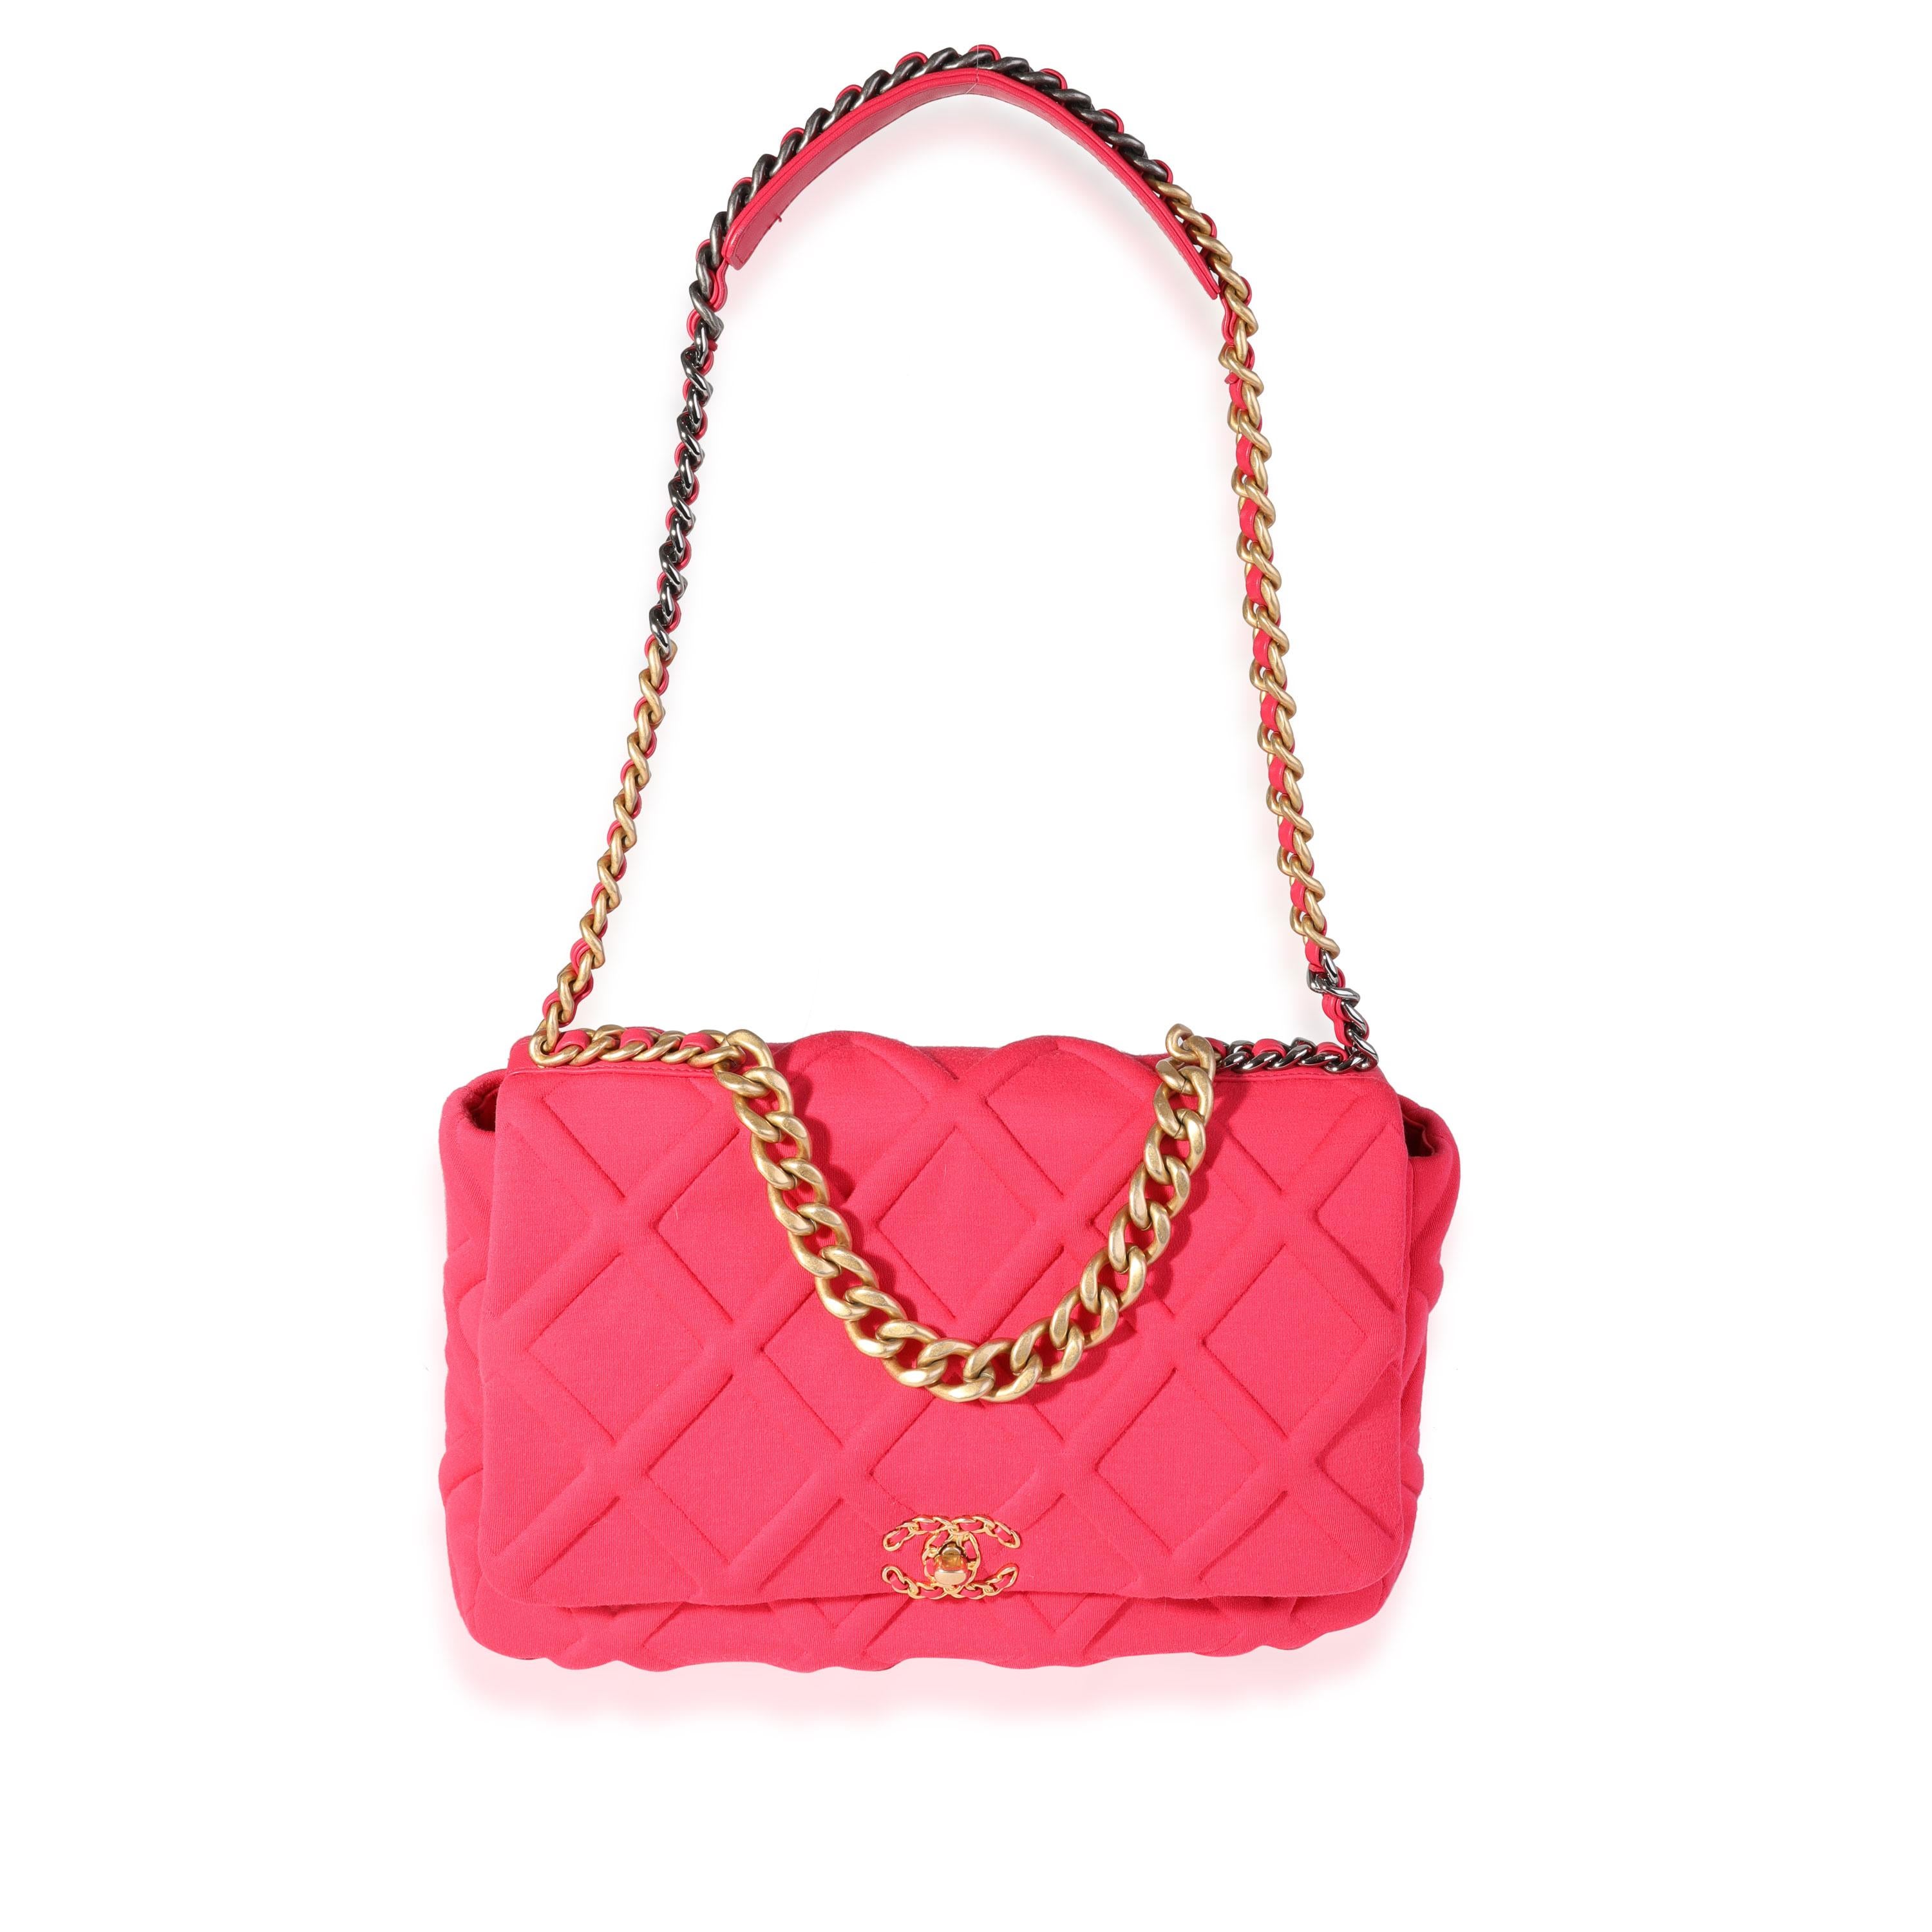 Listing Title: Chanel Hot Pink Quilted Jersey Large Chanel 19 Flap Bag
SKU: 120694
Condition: Pre-owned 
Handbag Condition: Excellent
Condition Comments: Excellent Condition. Light pilling to exterior. No other visible signs of wear.
Brand: